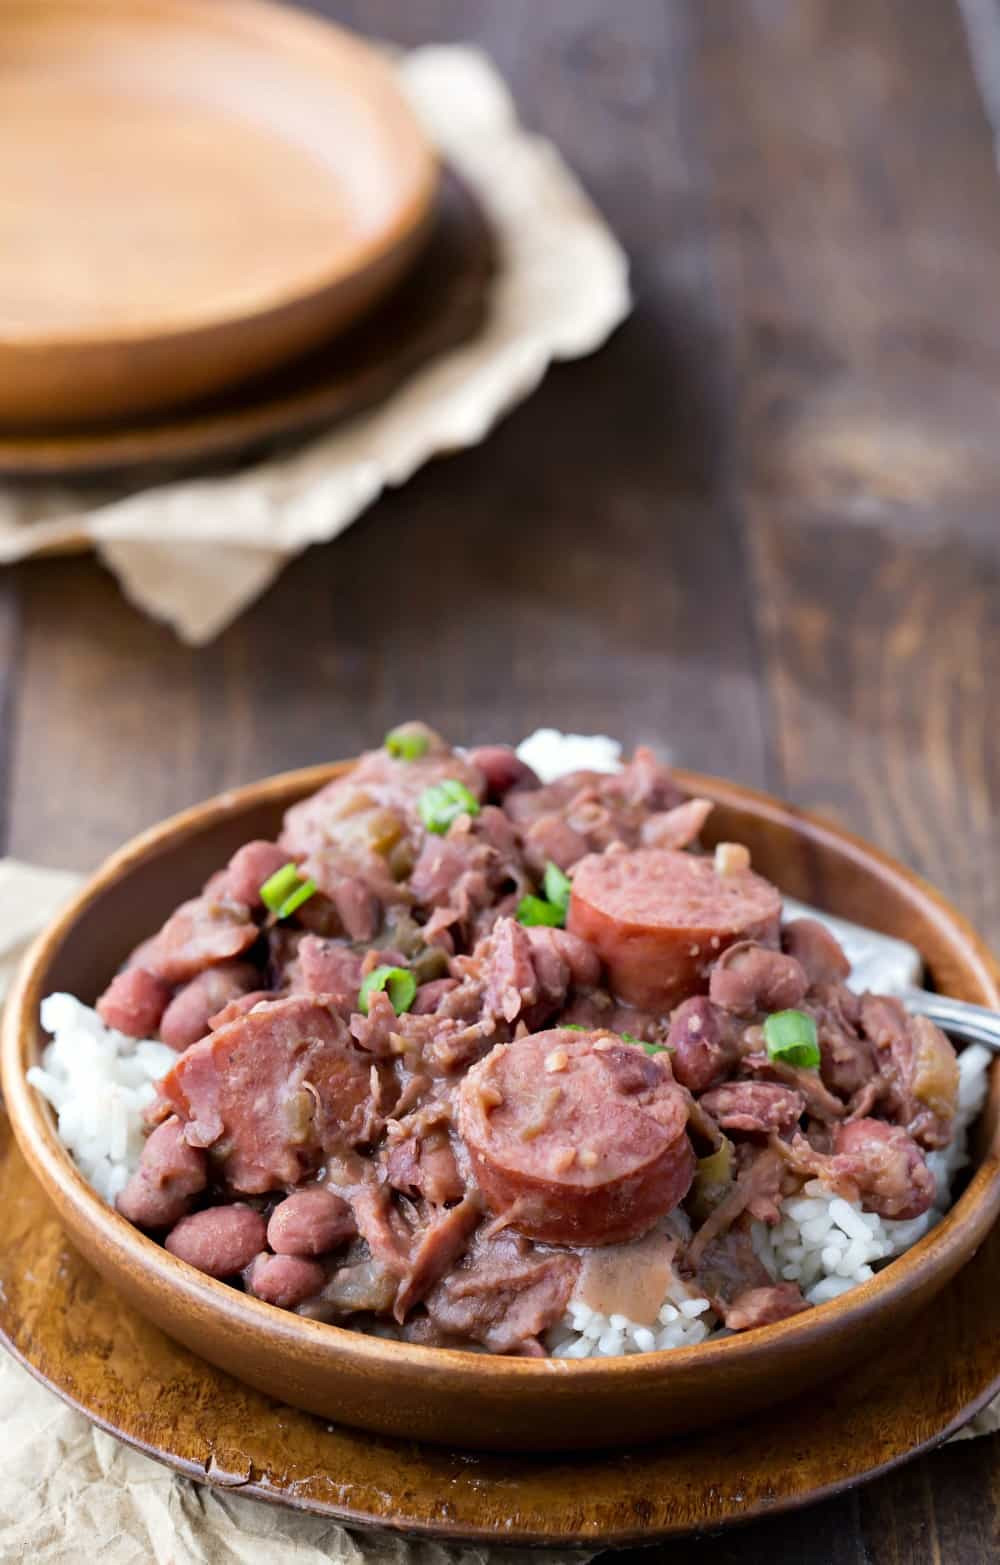 Red Beans And Rice Crock Pot
 Crock Pot Red Beans and Rice I Heart Eating